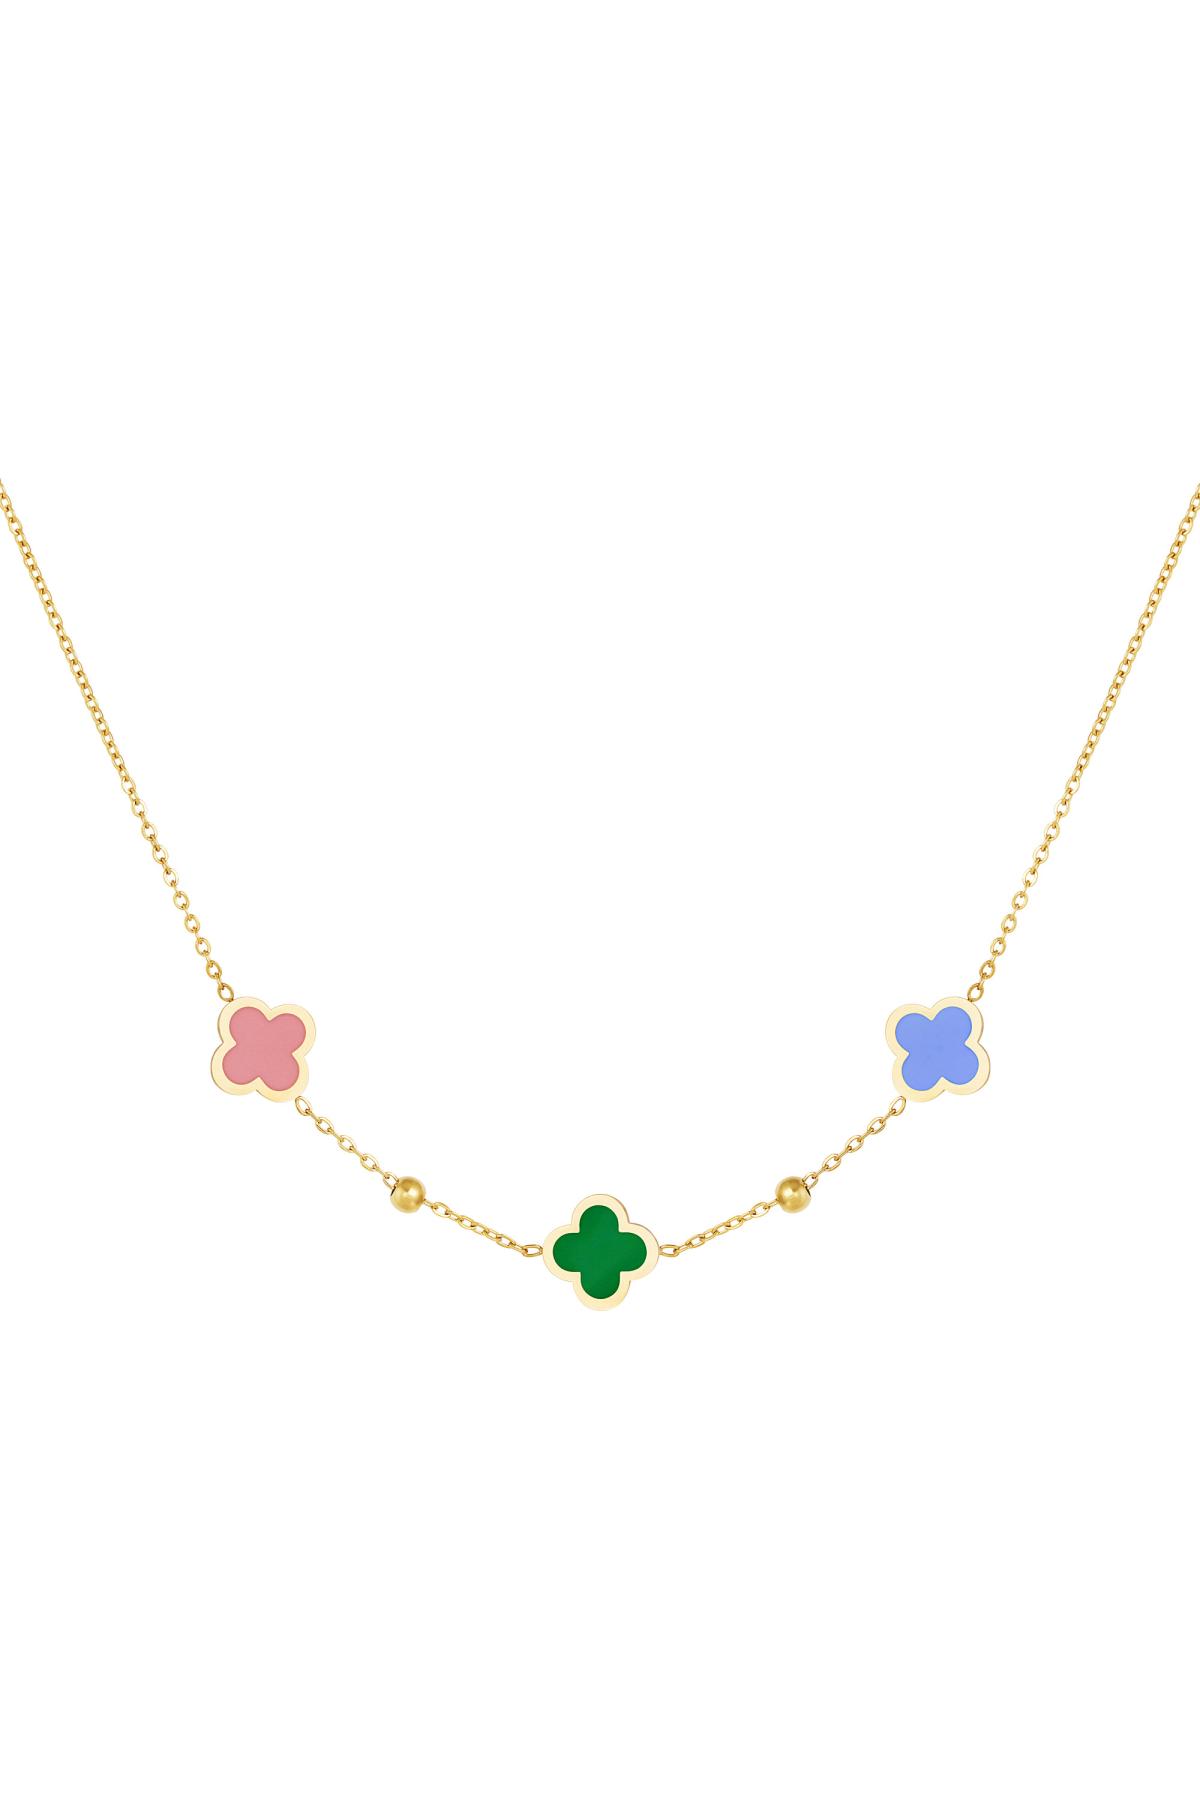 Necklace 3 clovers and small balls Green &amp; Gold Stainless Steel